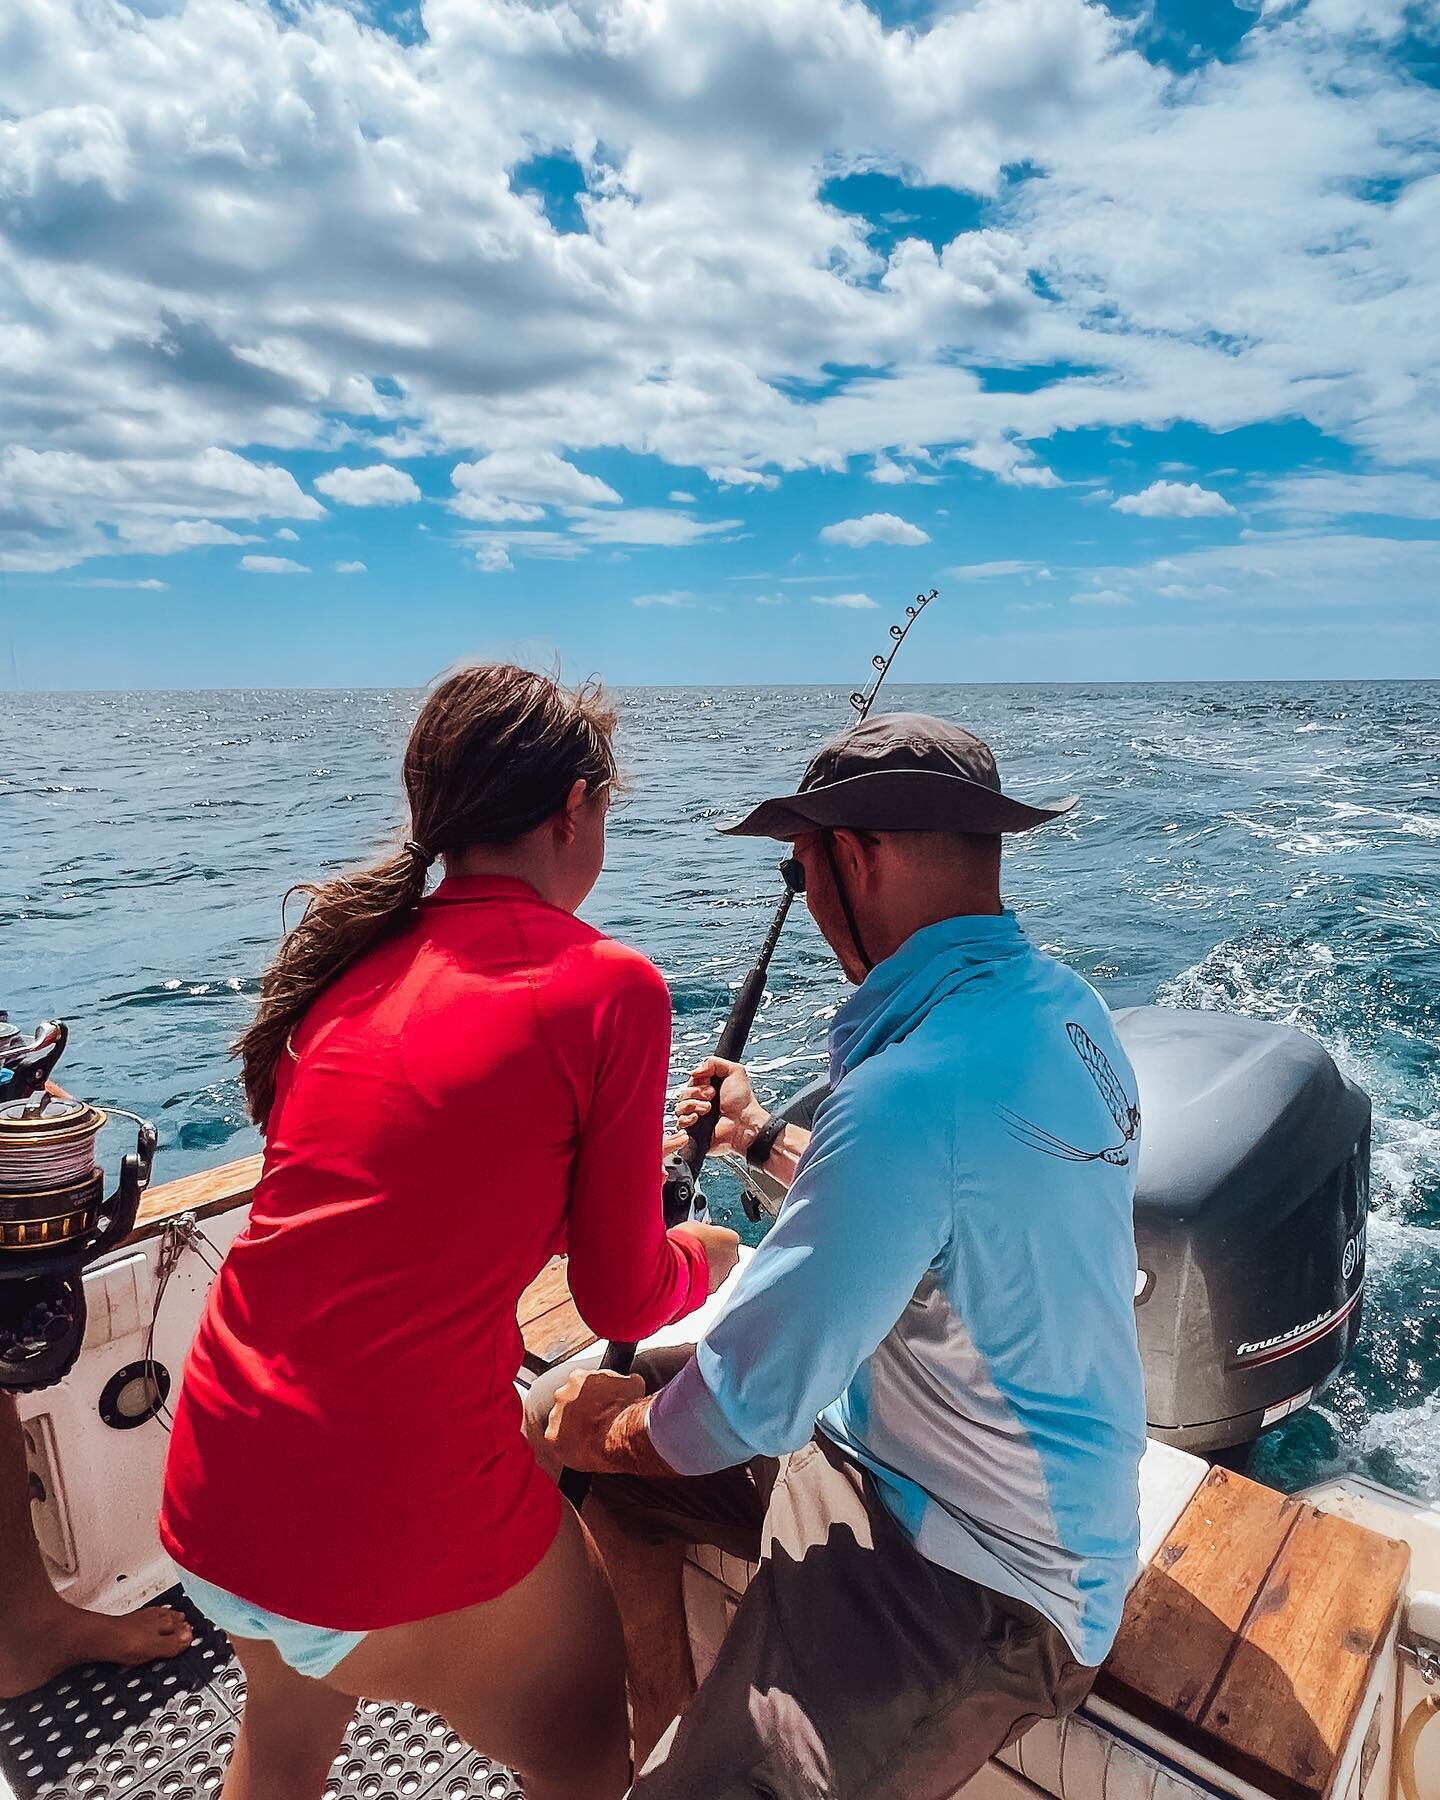 Family time on the Pacific Ocean 🌊 

#fishing #familyfishing #familyvacation #familytrip #familyfriendly #kidsfishing #funtimes #costarica #costaricavacation #pacificocean #sunnyday #fishon